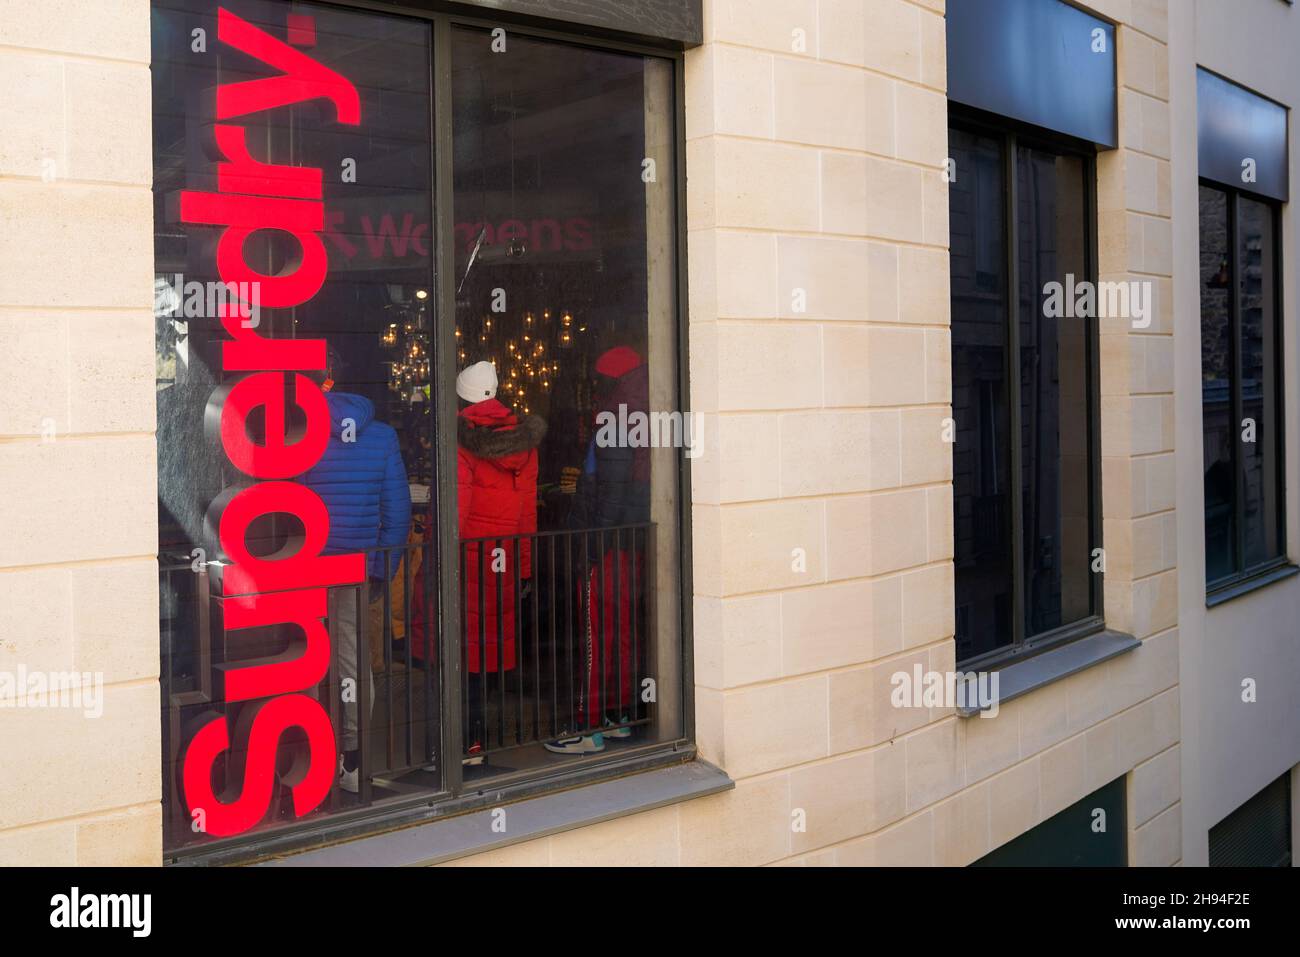 Bordeaux , Aquitaine France - 10 25 2021 : superdry logo brand fashion shop  and text sign store on facade boutique Stock Photo - Alamy